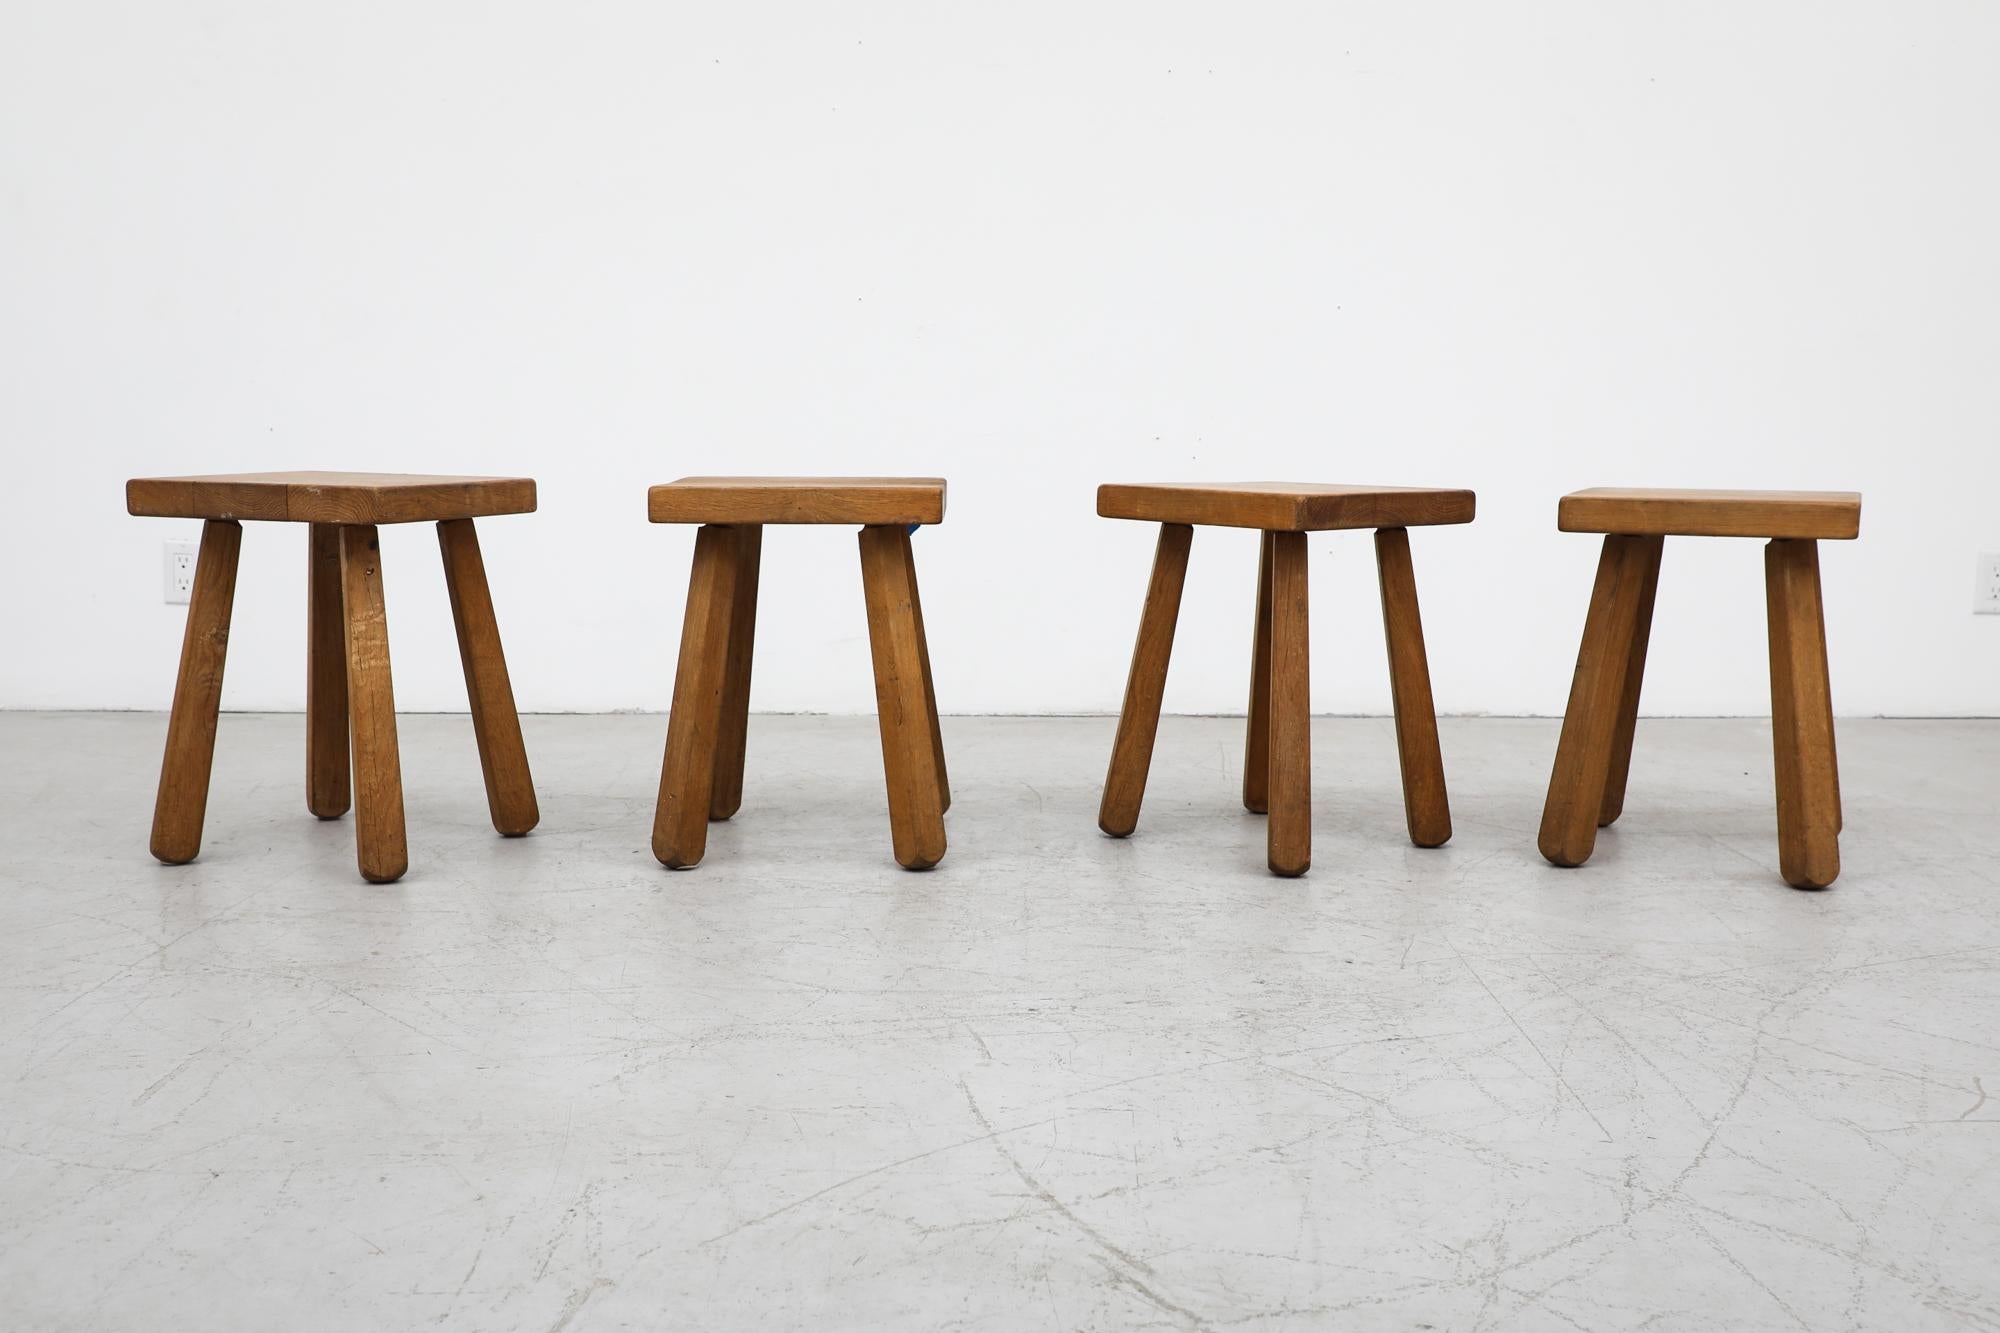 Set of 4 Mid-Century Pierre Chapo inspired solid oak stools. Perfect little side tables or side stools. In original condition with a handsome vintage patina. Their wear is consistent with their age and use. Note that the tops are imperfect with some